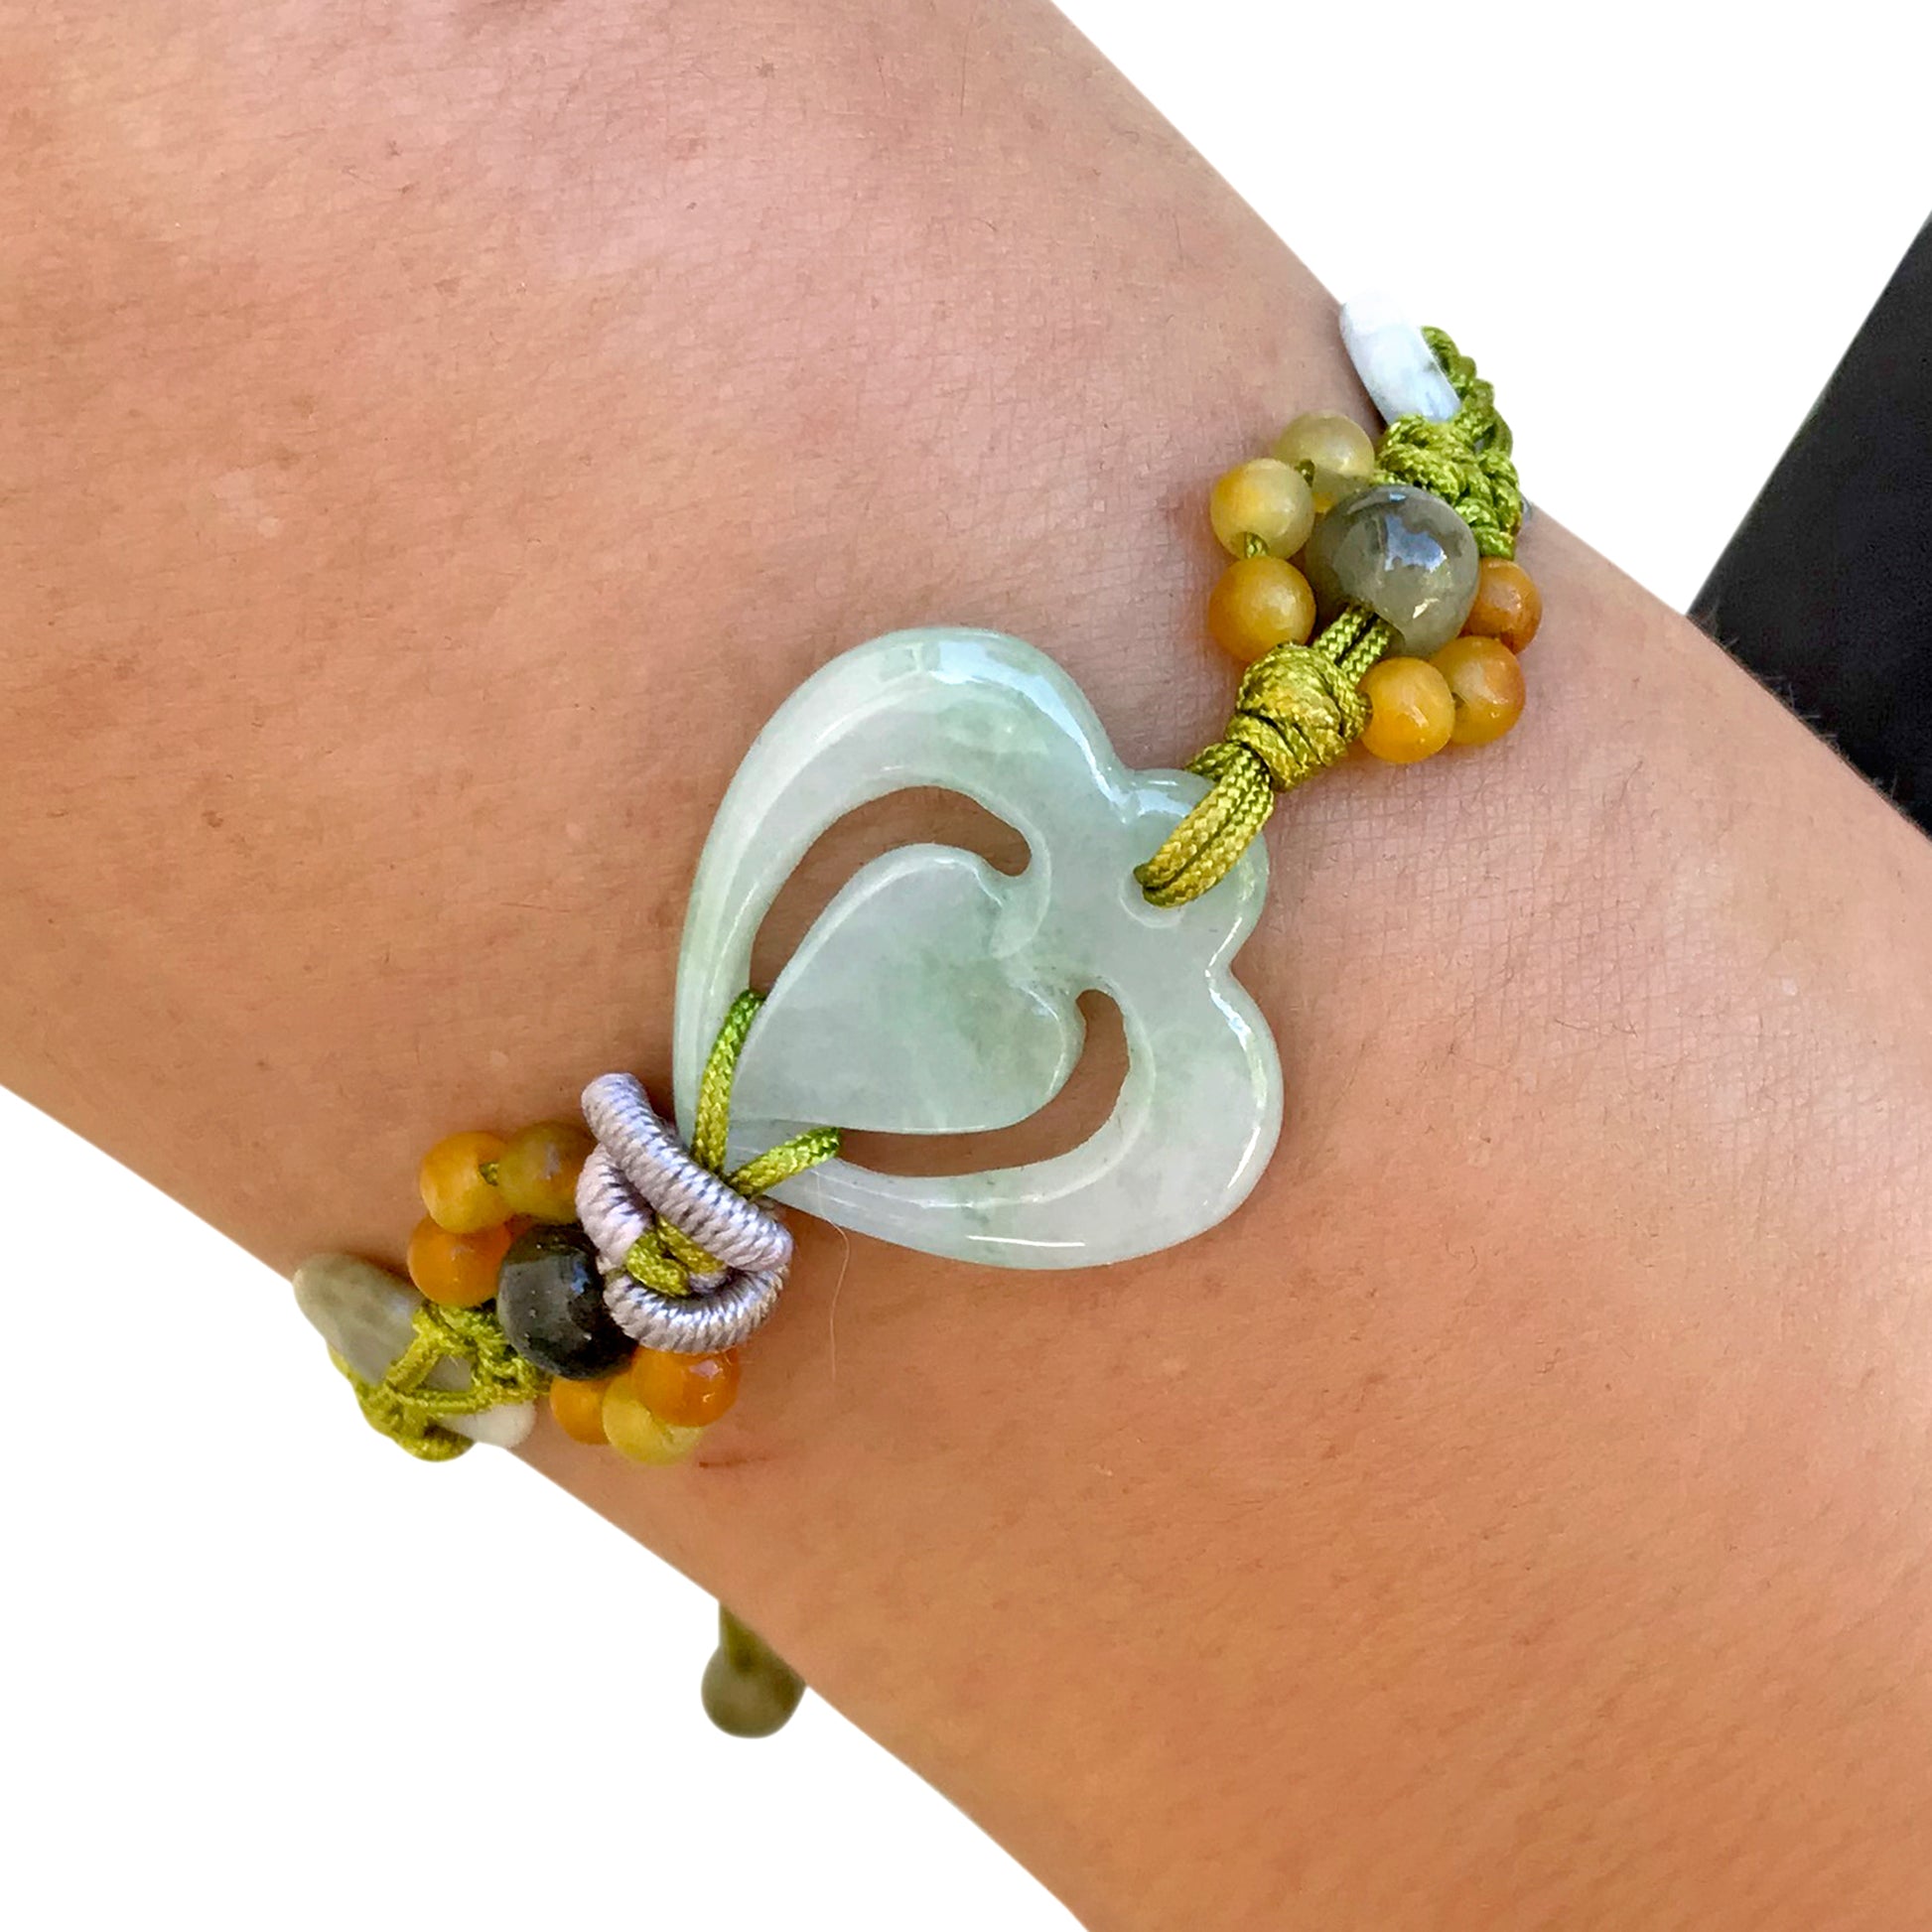 Get Ready for Love with the Heart Honey Jade Bracelet made with Lime Cord